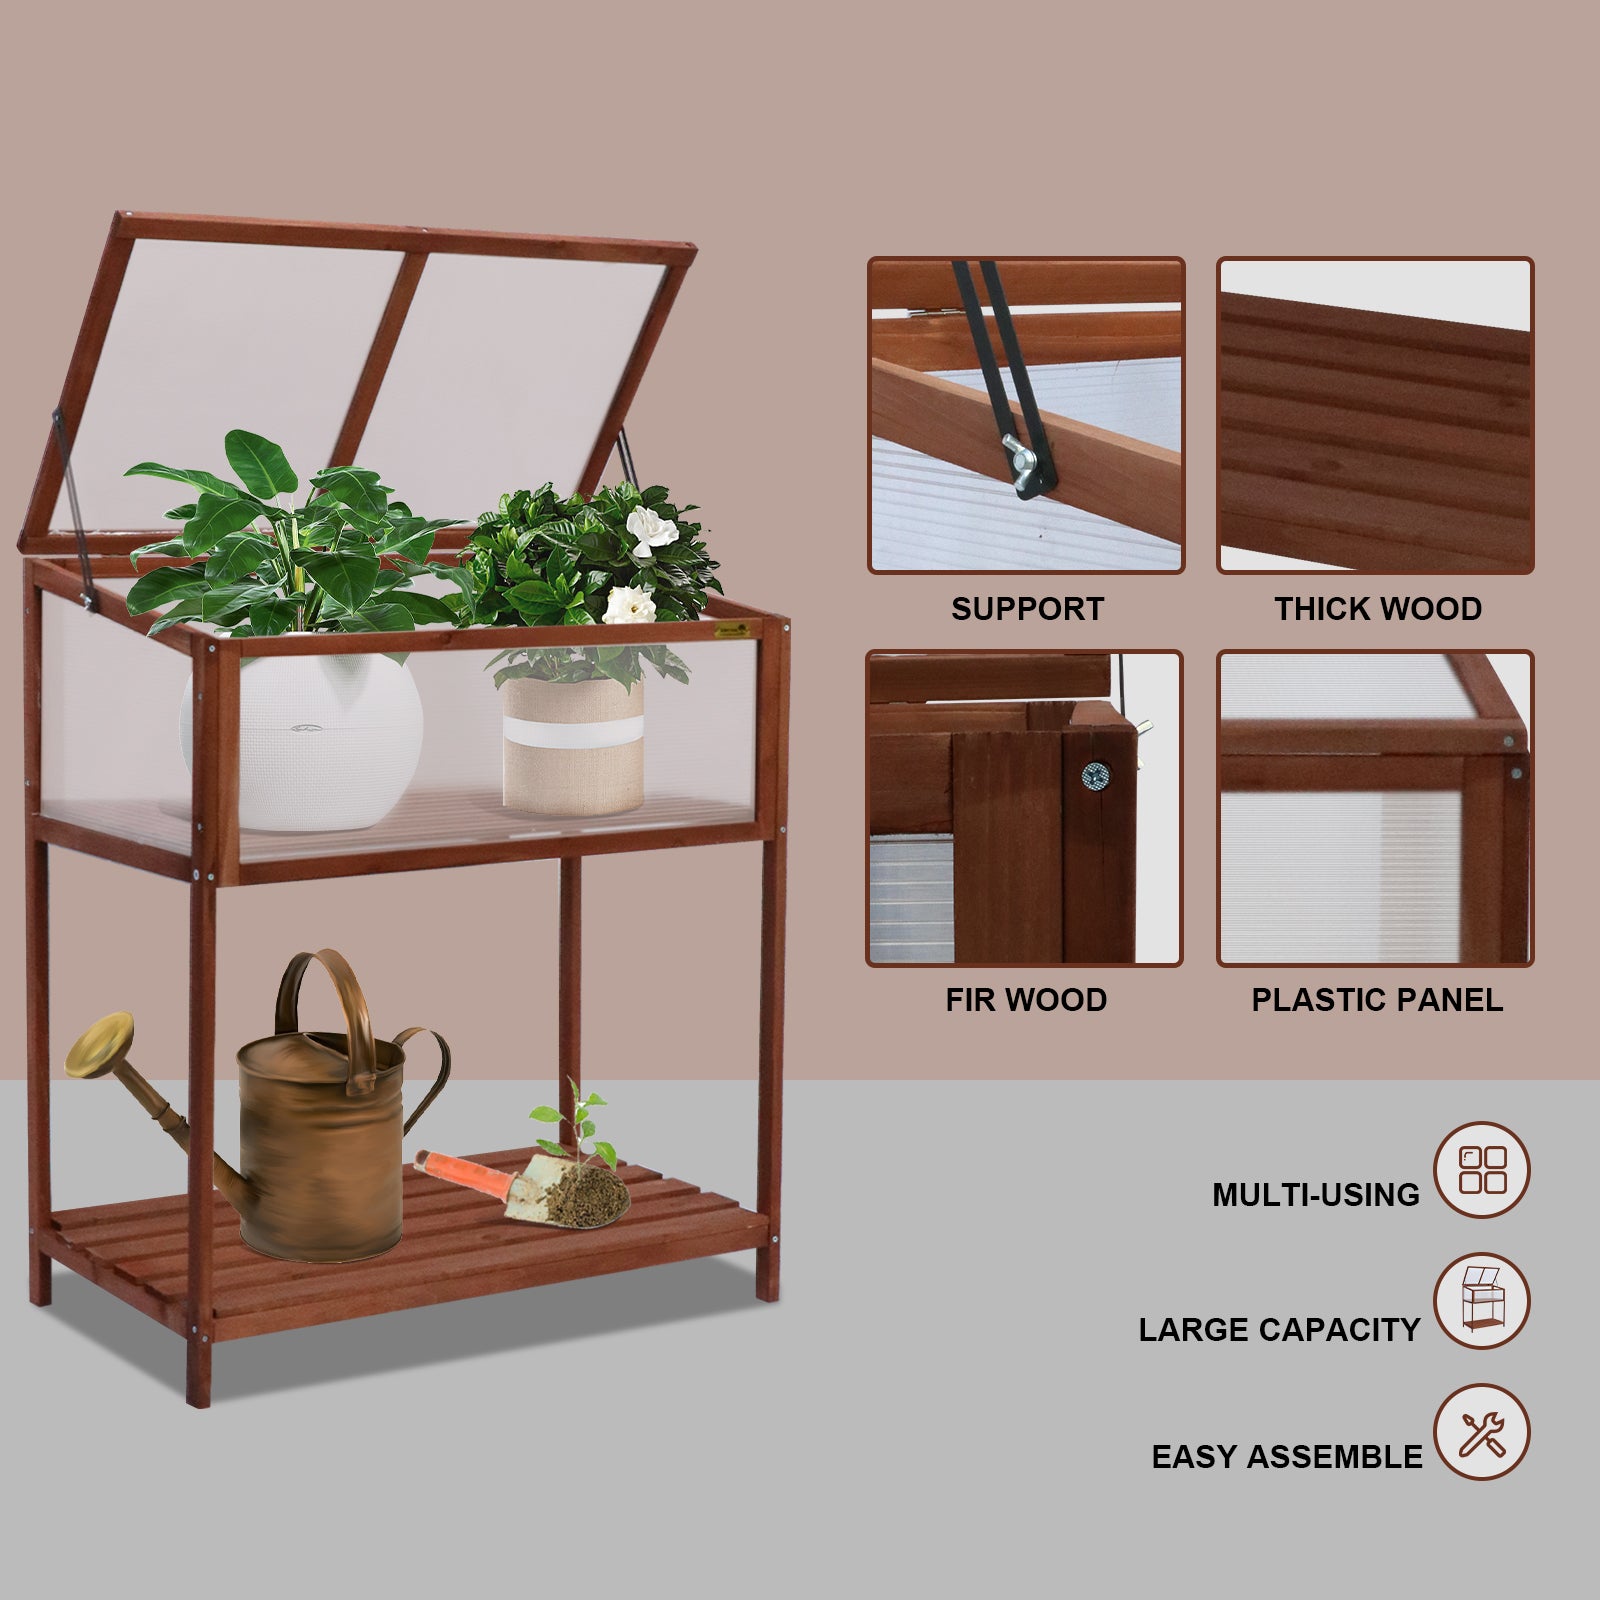 Wooden Greenhouse with Shelf  Cold Frame Garden for Home Decor Patio Balcony